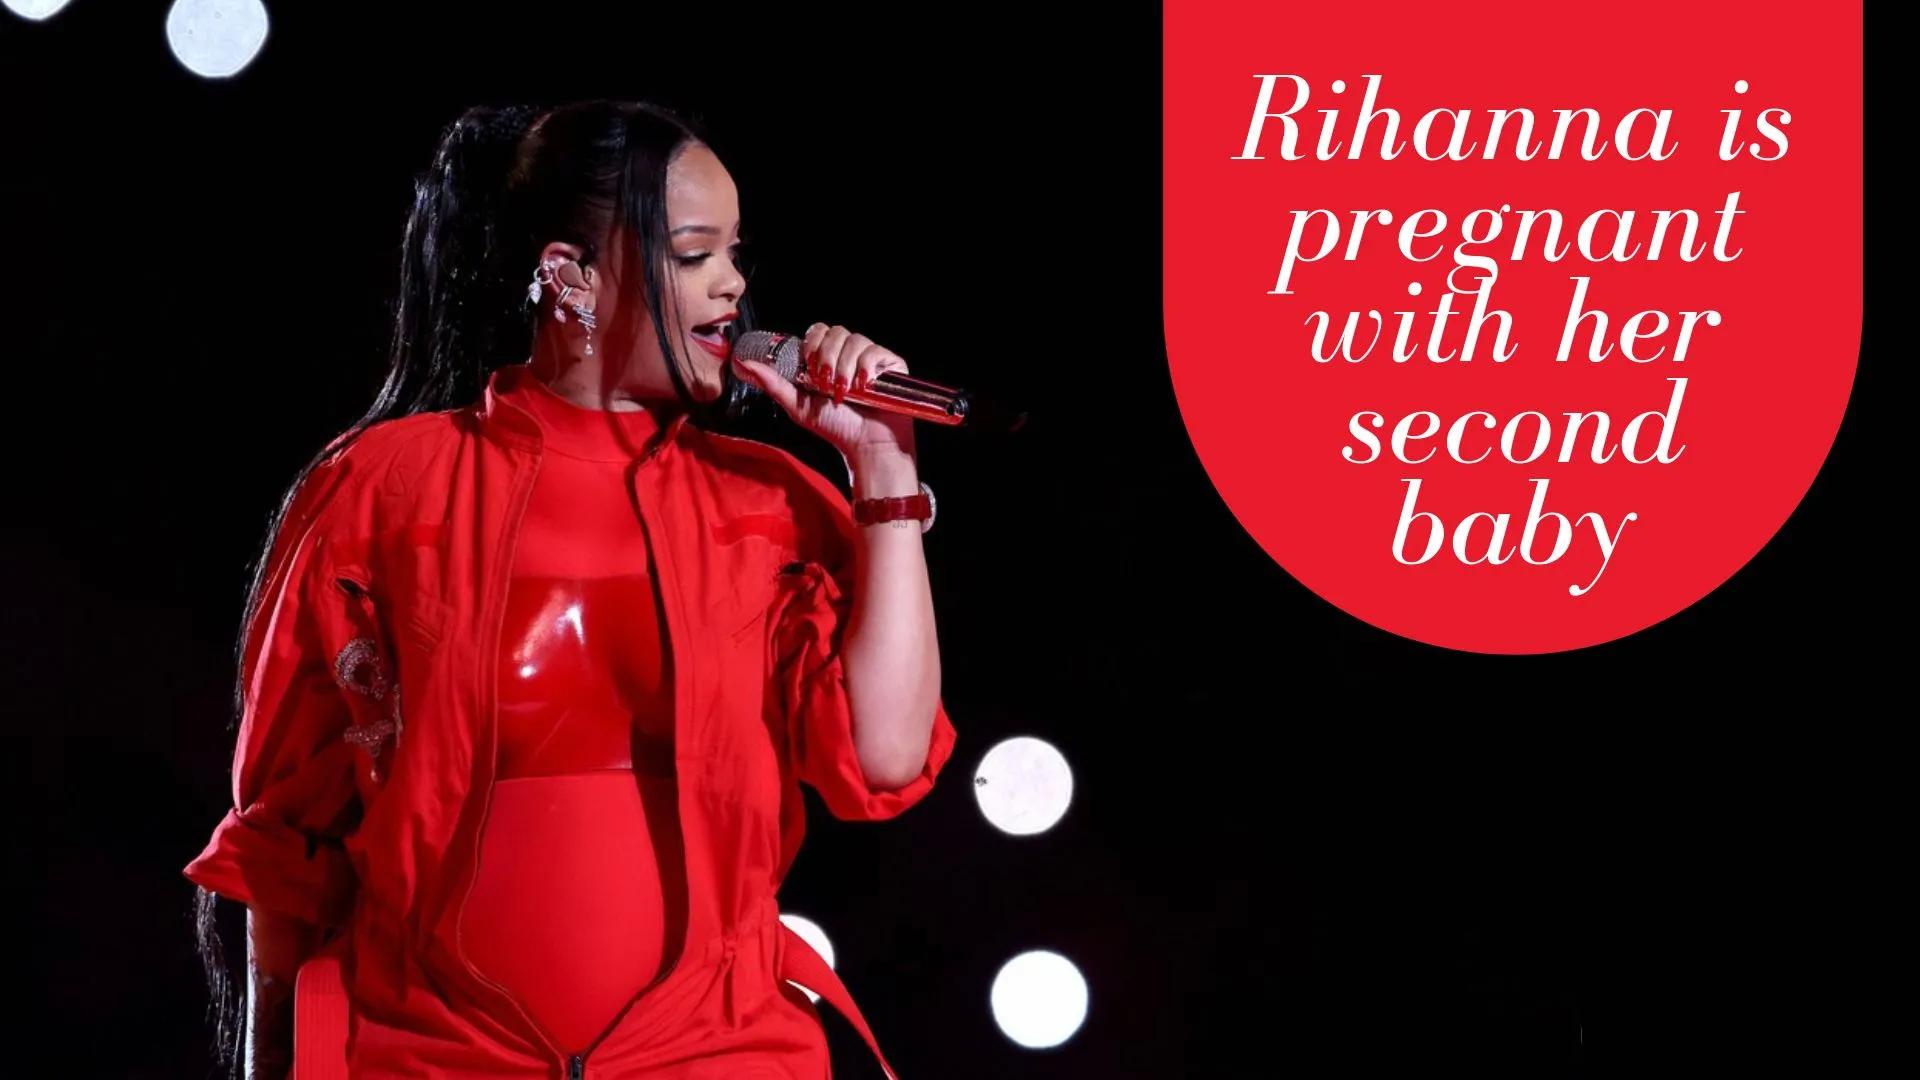 Rihanna is pregnant with her second baby (Image credit: Just Jared)